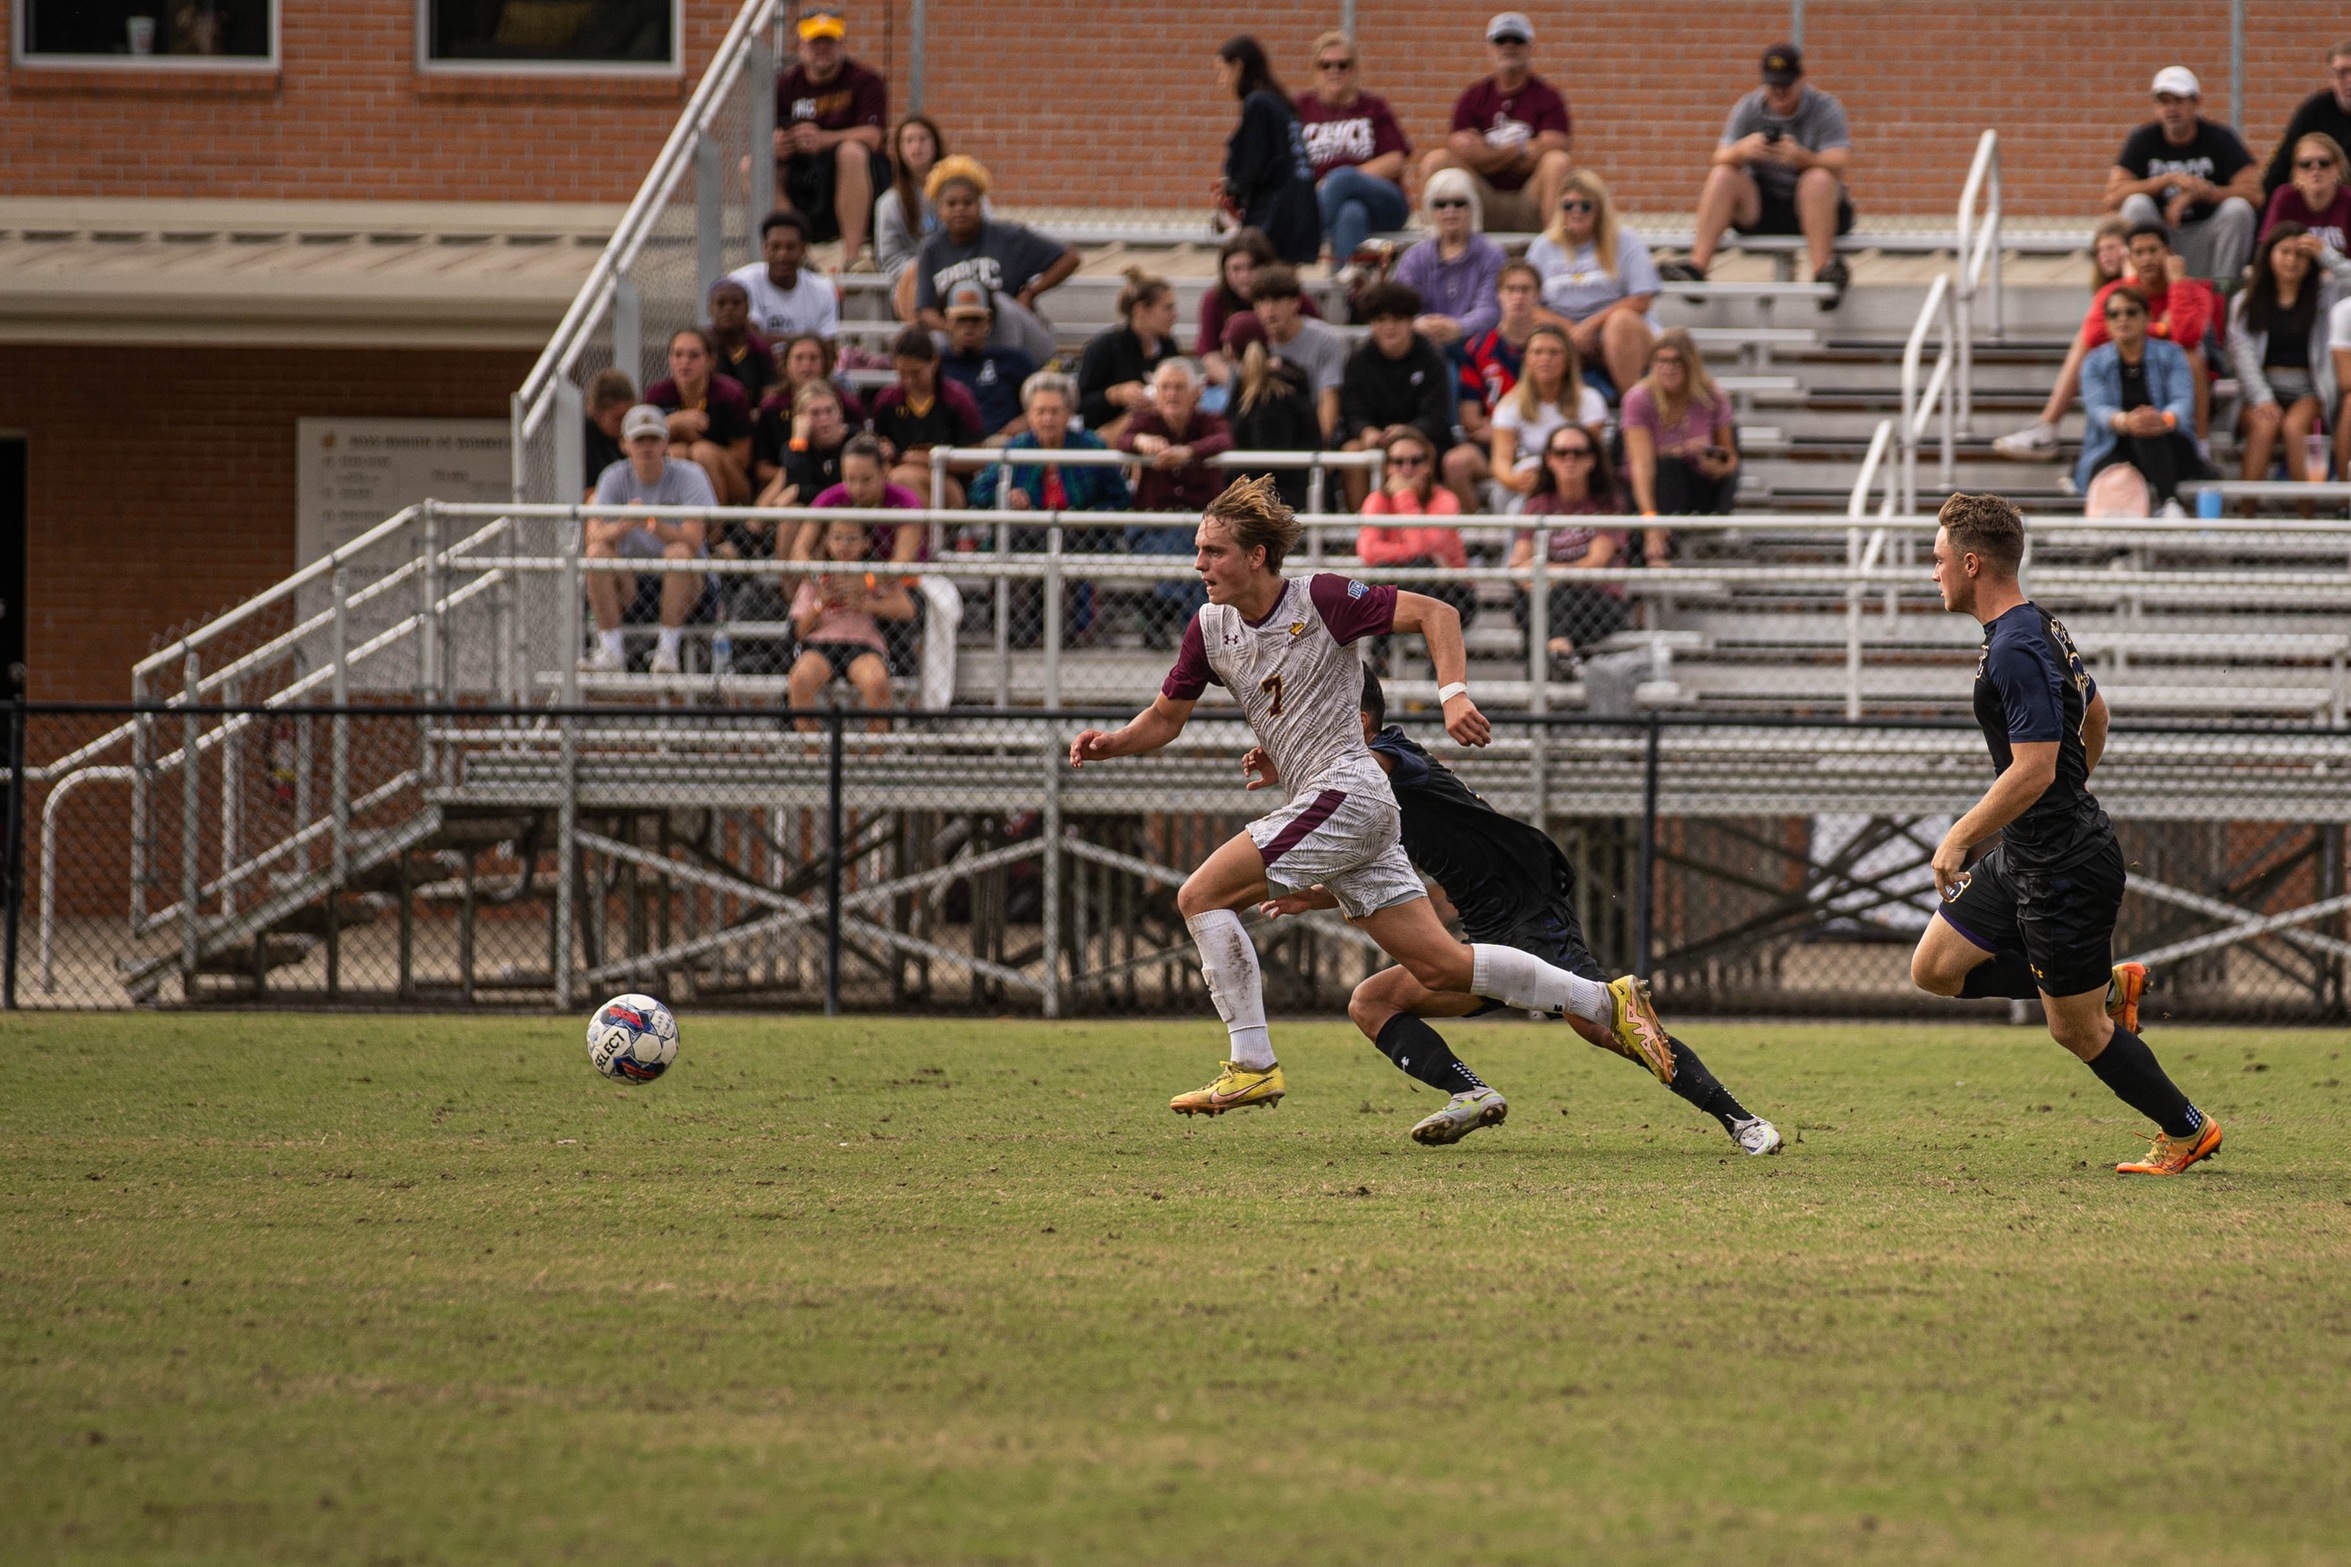 SEASON PREVIEW: No. 13 PRCC men driven to finish what they started